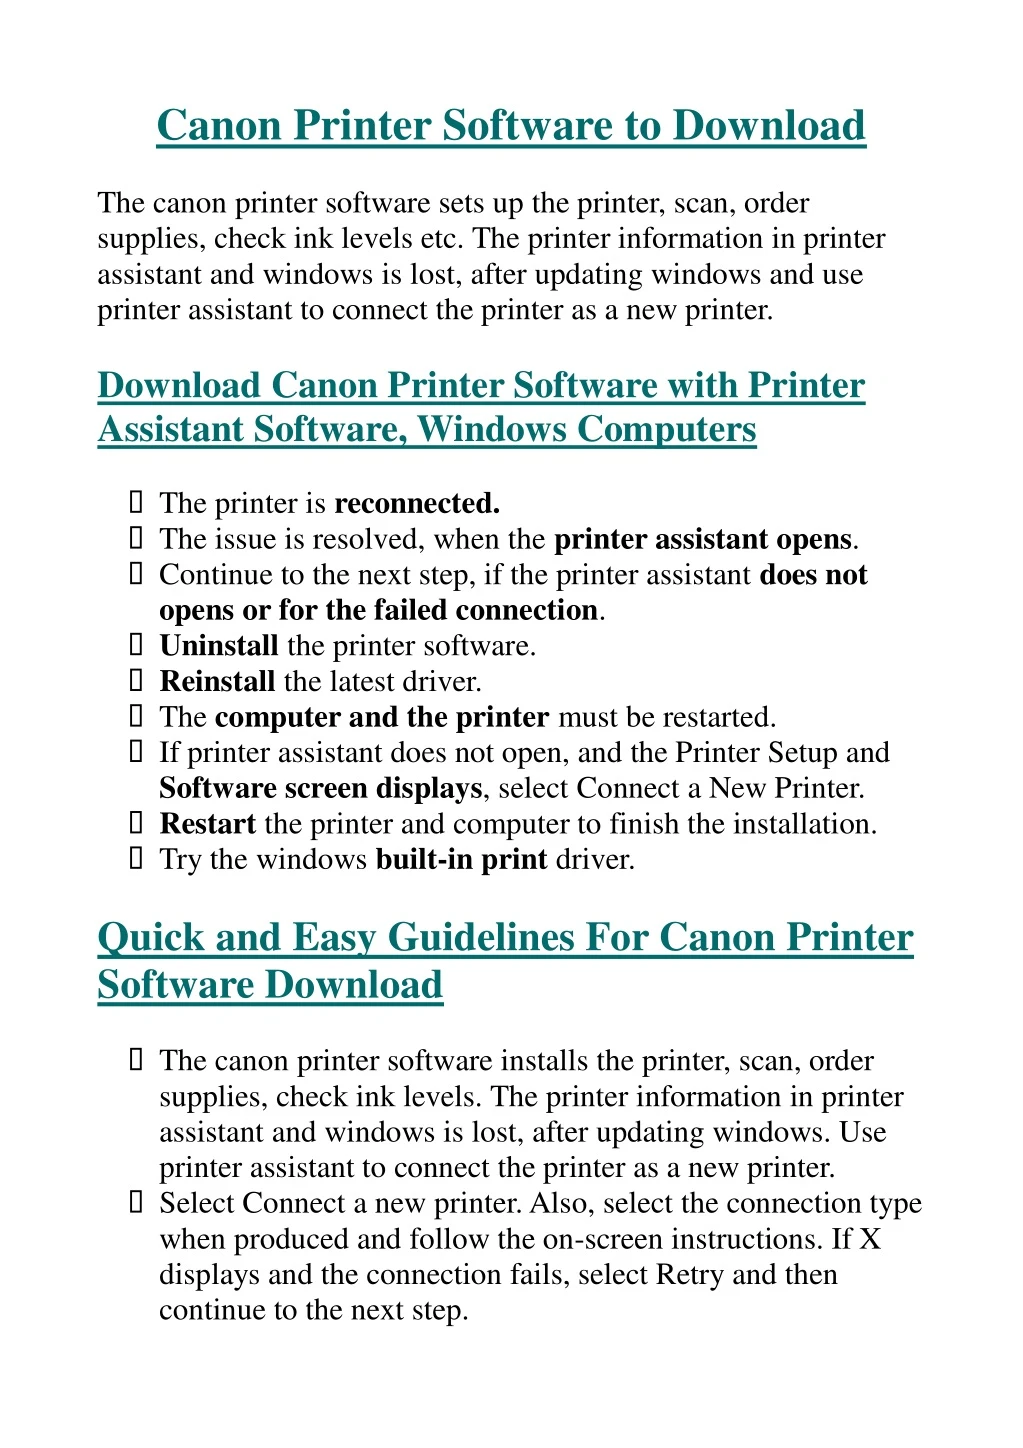 canon printer software to download